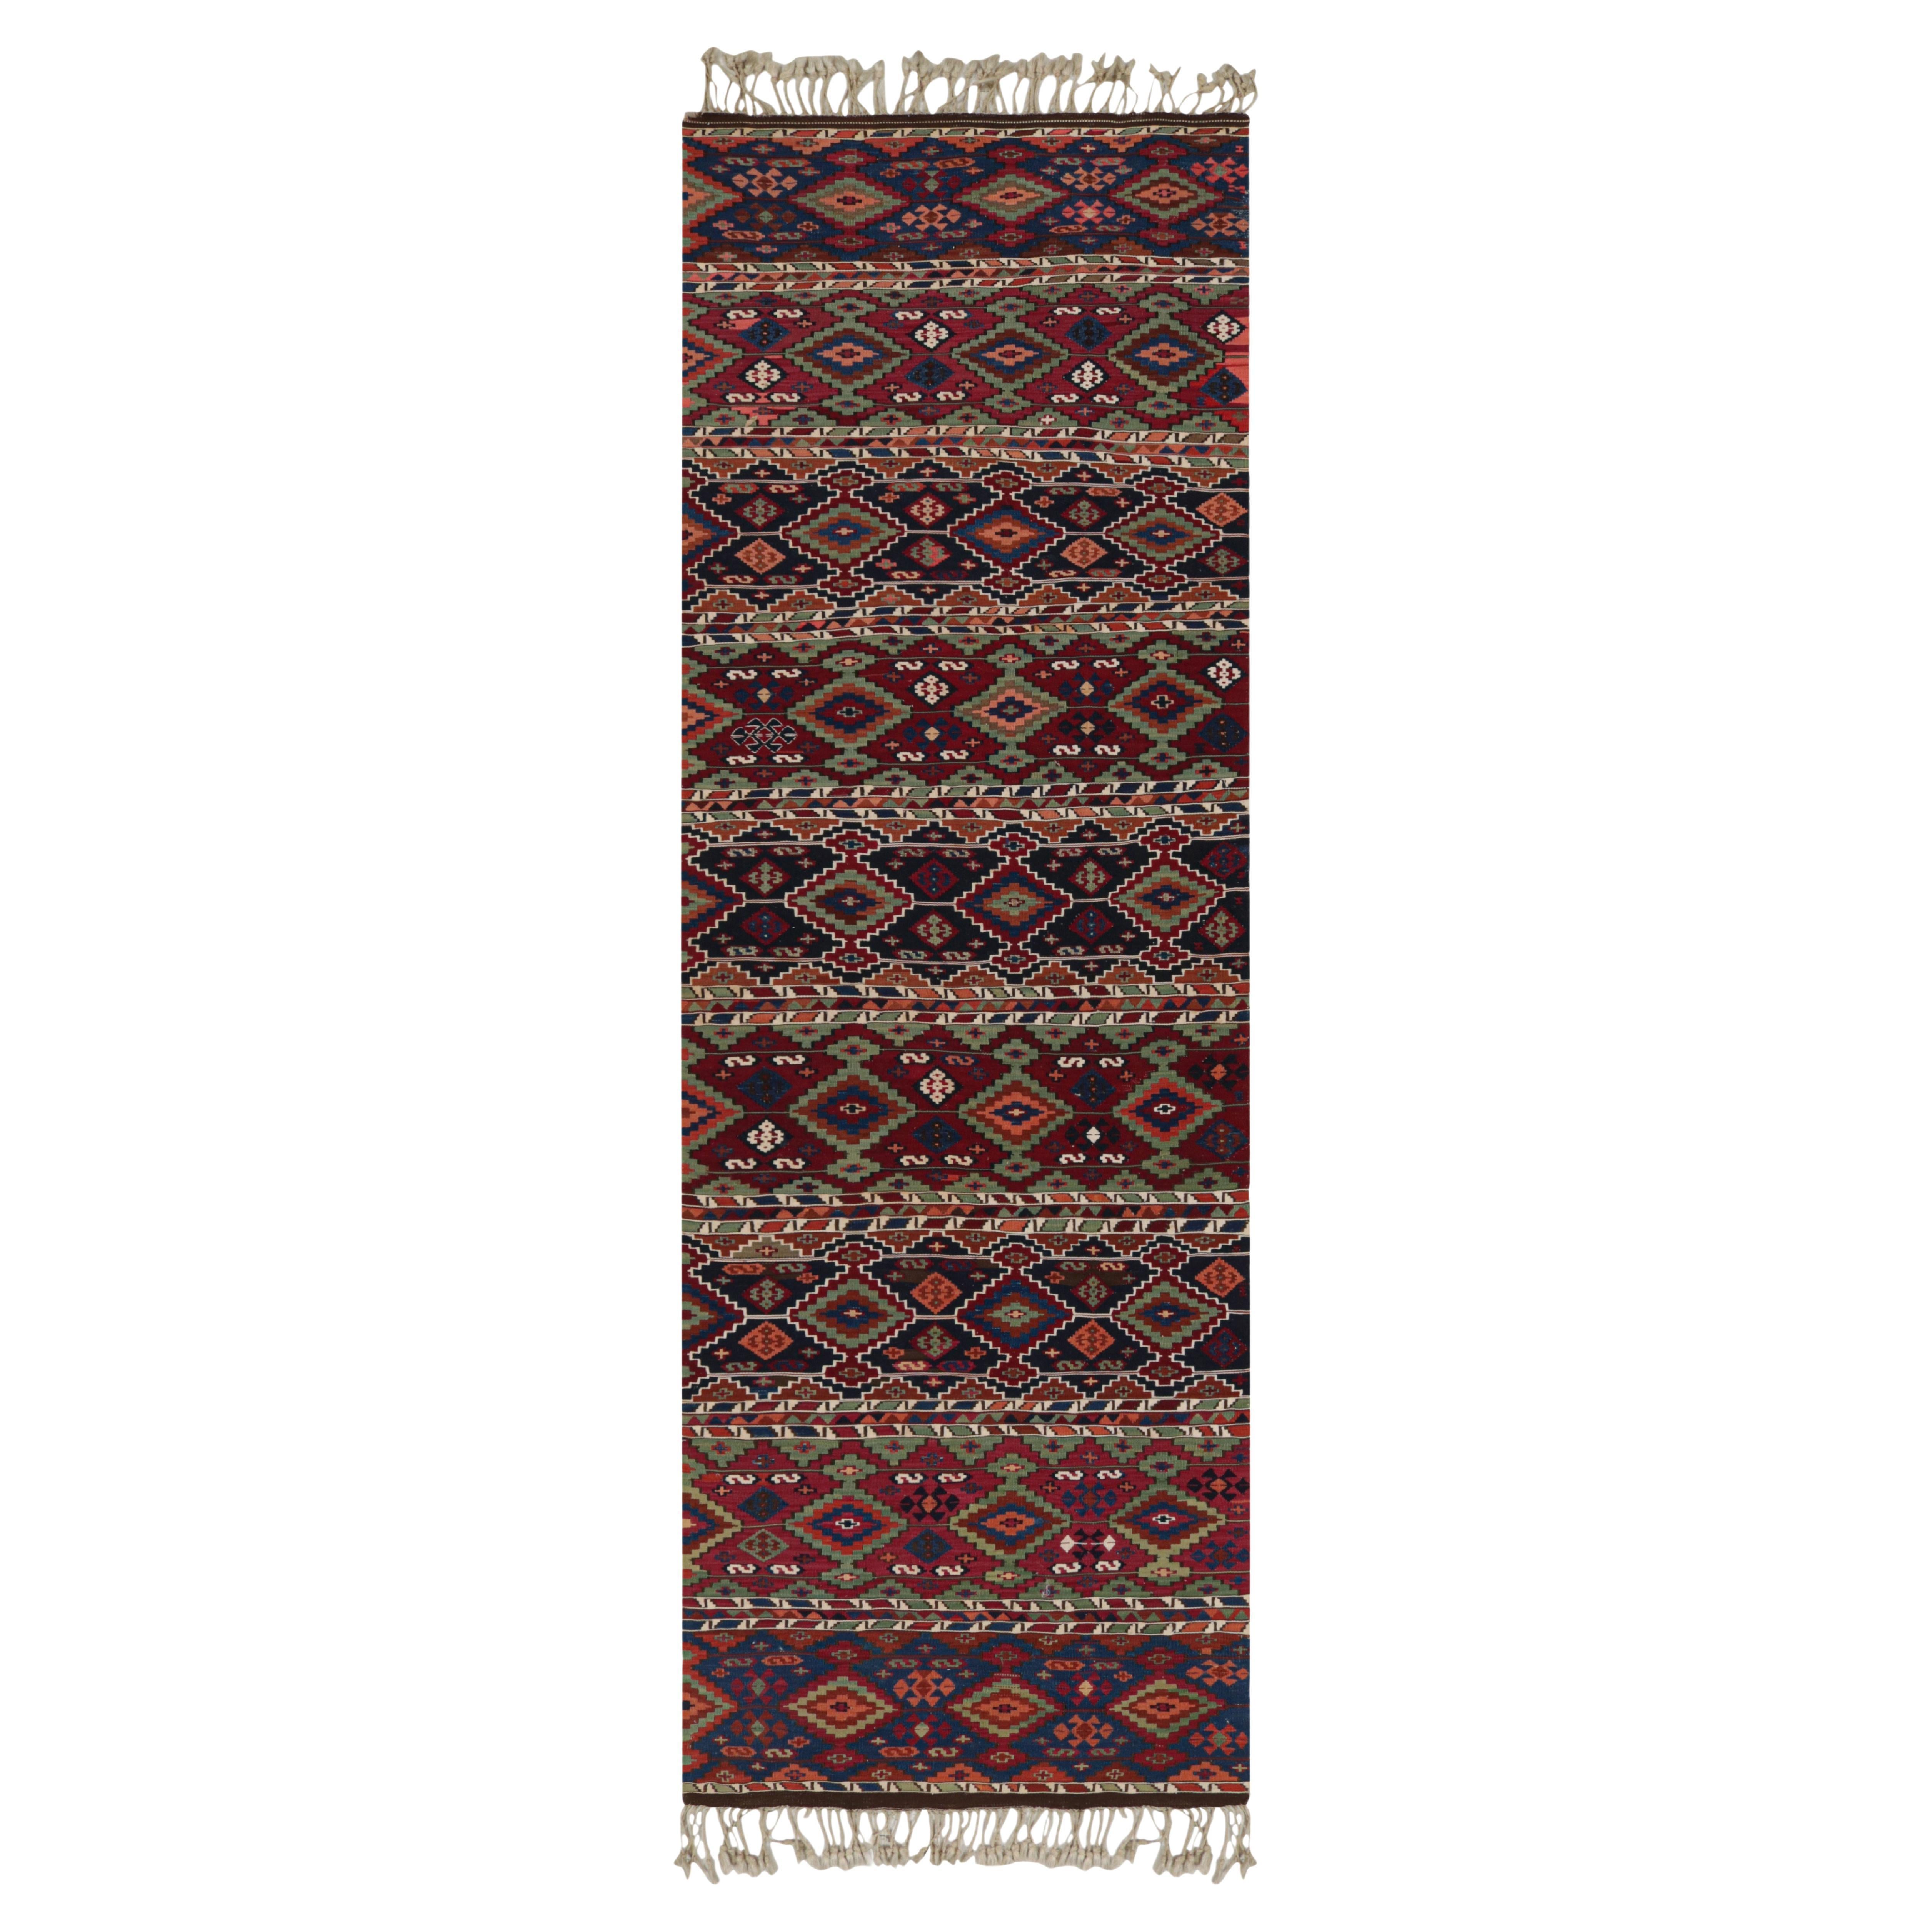 Antique Turkish Red and Blue Multi-Color Wool Kilim Rug by Rug & Kilim